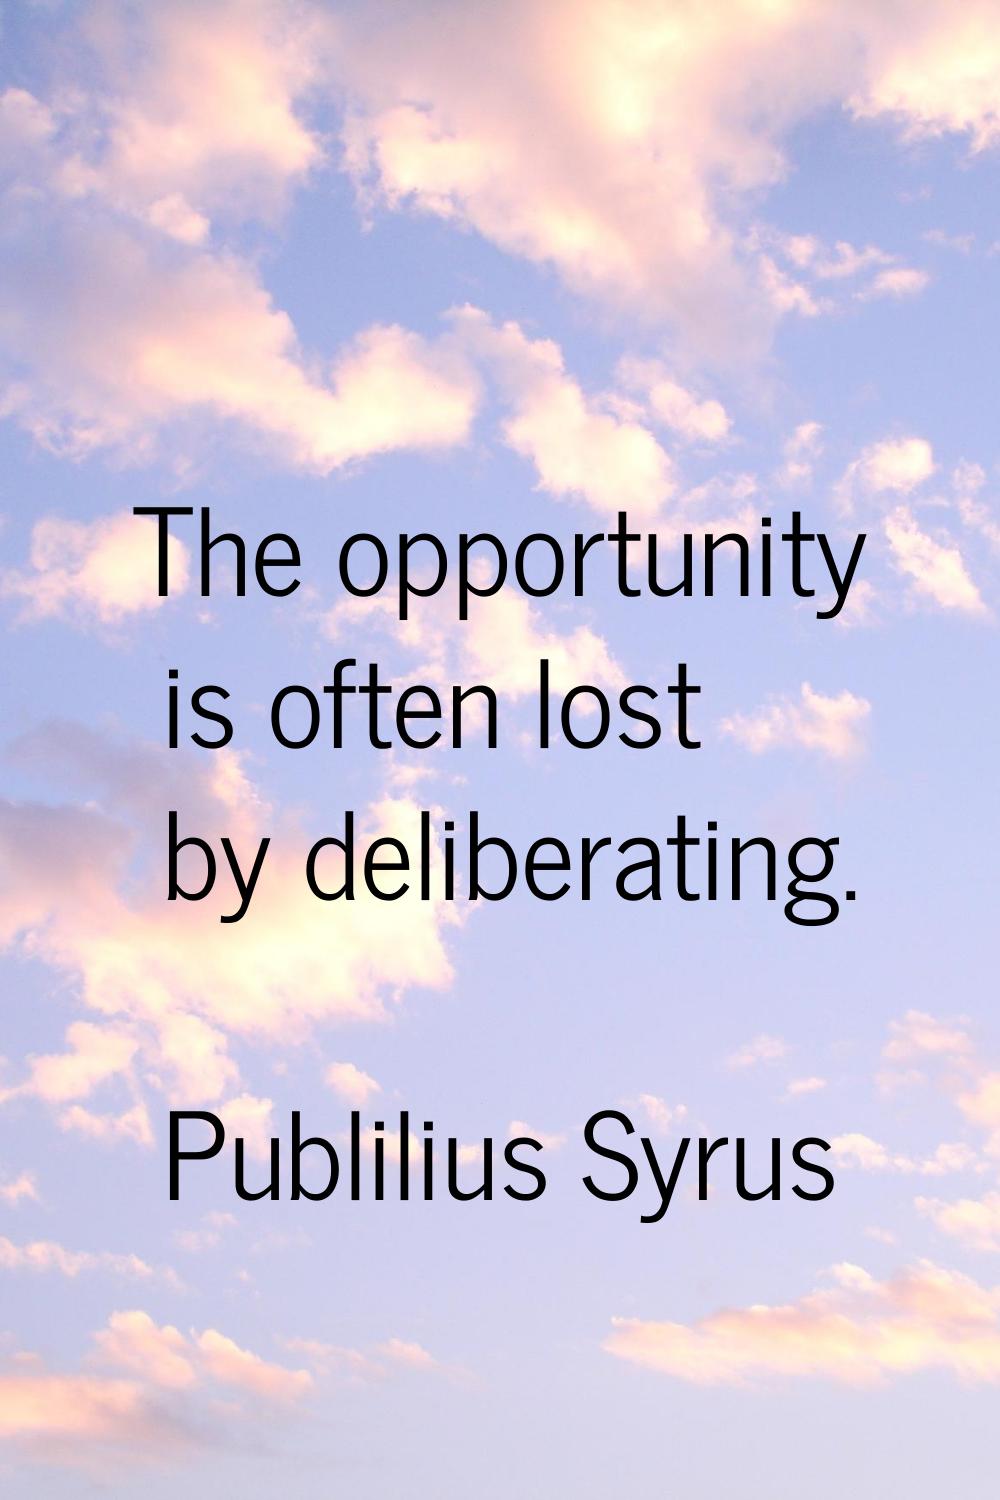 The opportunity is often lost by deliberating.